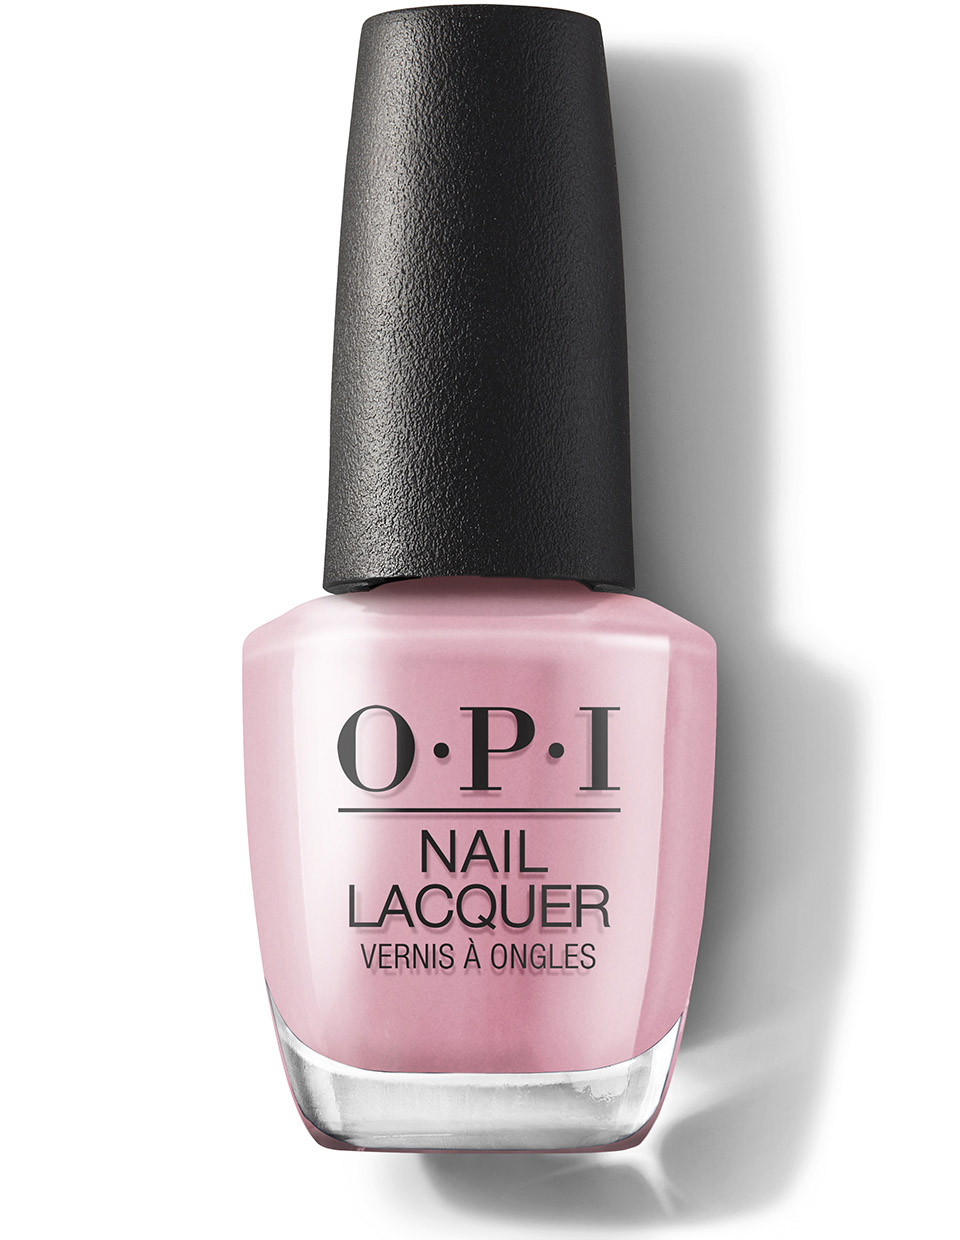 P)Ink on Canvas - Nail Lacquer | OPI